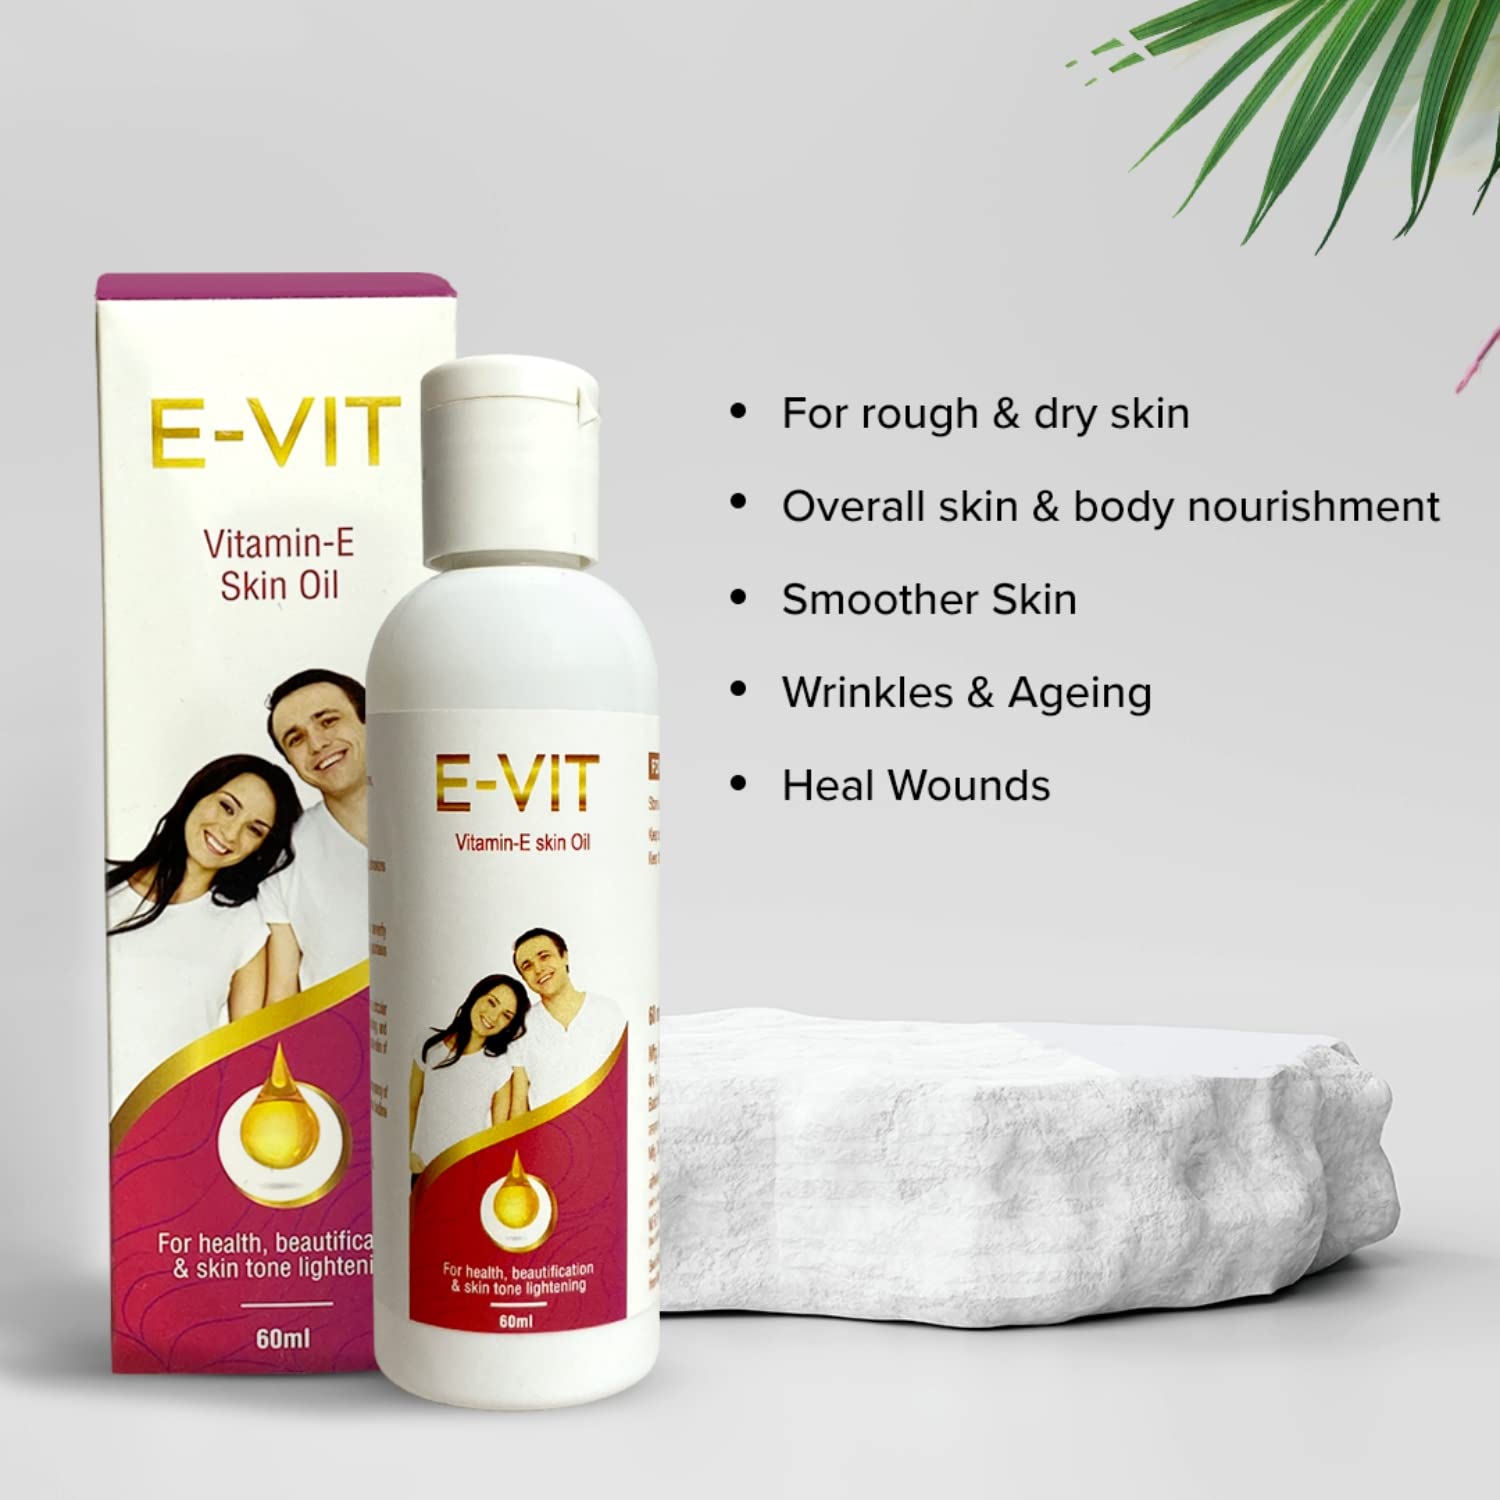 Healthvit E-VIT Vitamin E Skin Oil For Rough And Dry Skin | Help To Fight Wrinkles And Age Spots | Recommended For Face Massage And Skin Toning | 60ml (Pack Of 3)